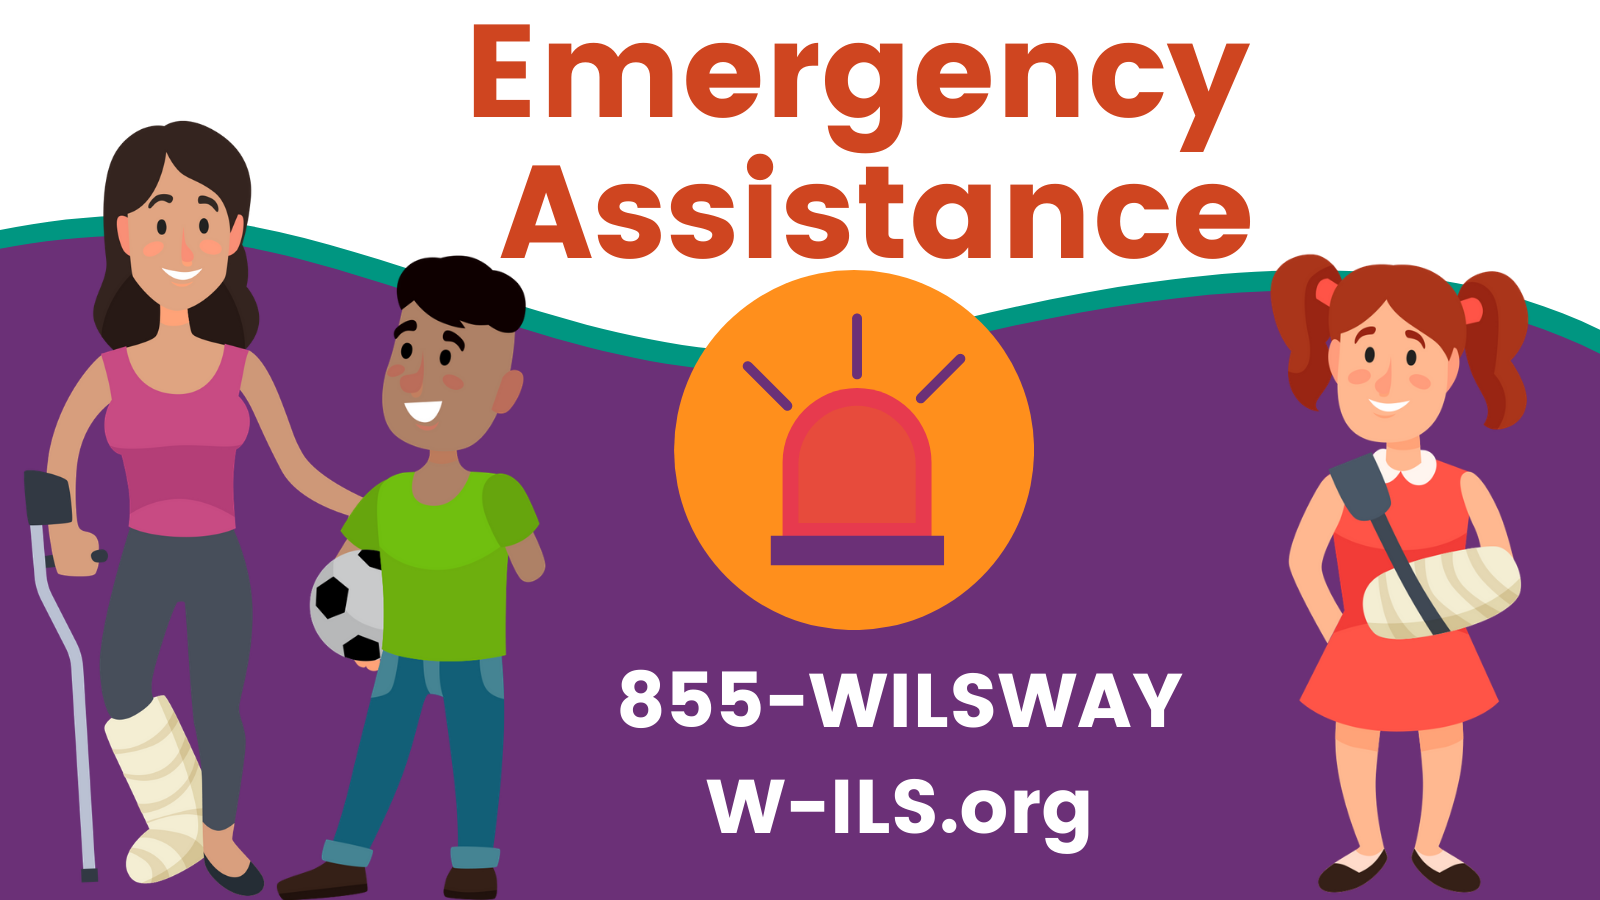 For Consumer Emergency Assistance, call 855-WILSWAY or visit W-ILS.org